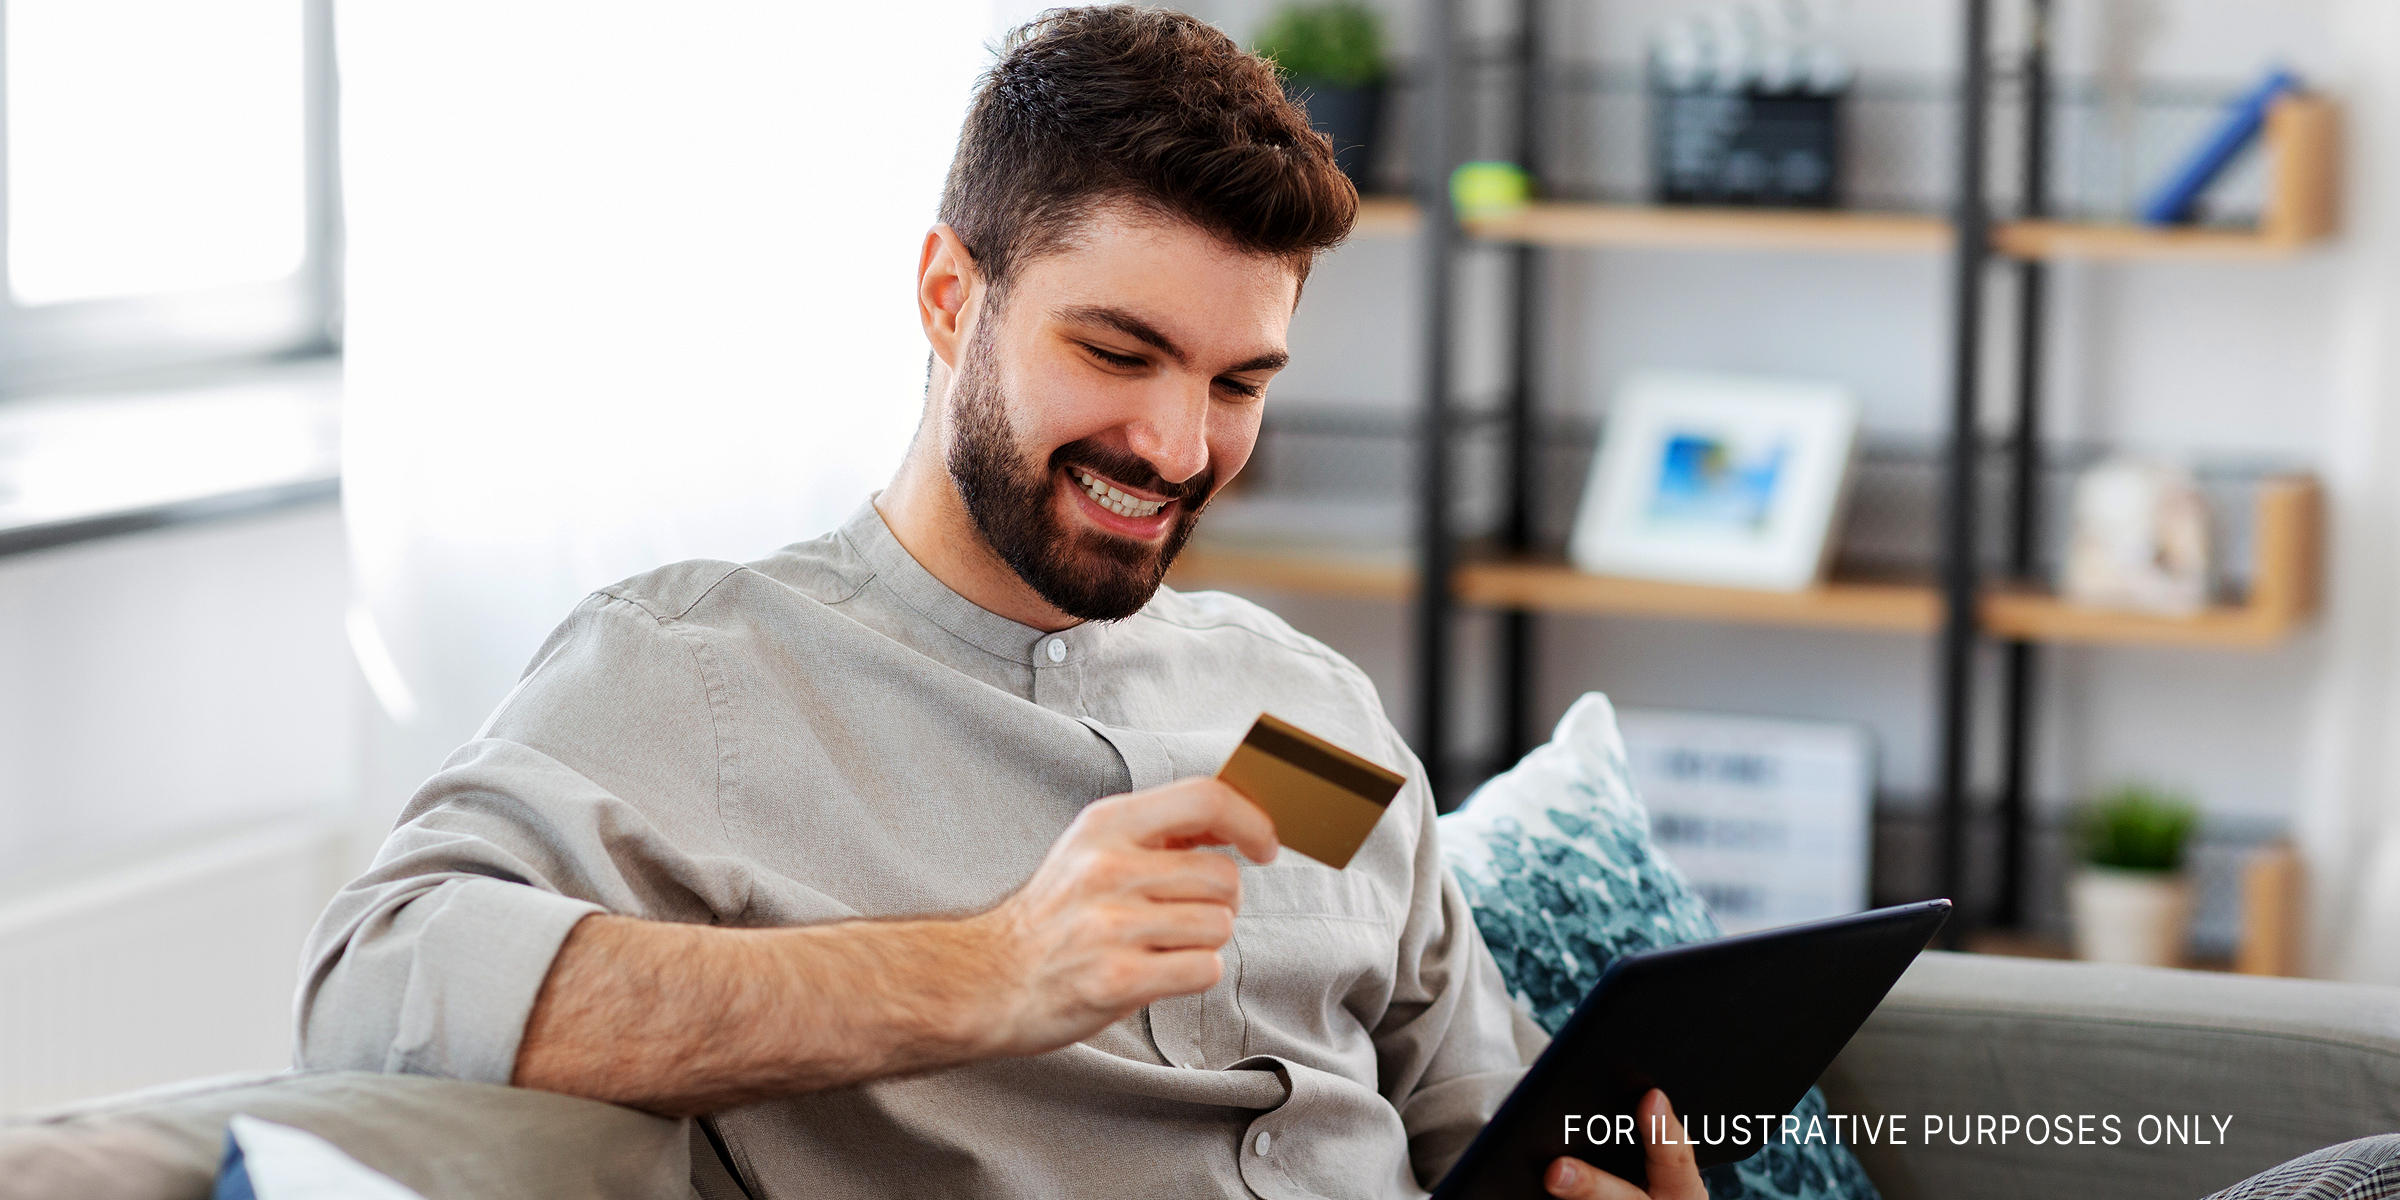 A man smiling while holding a card with a laptop on hand | Source: Shutterstock